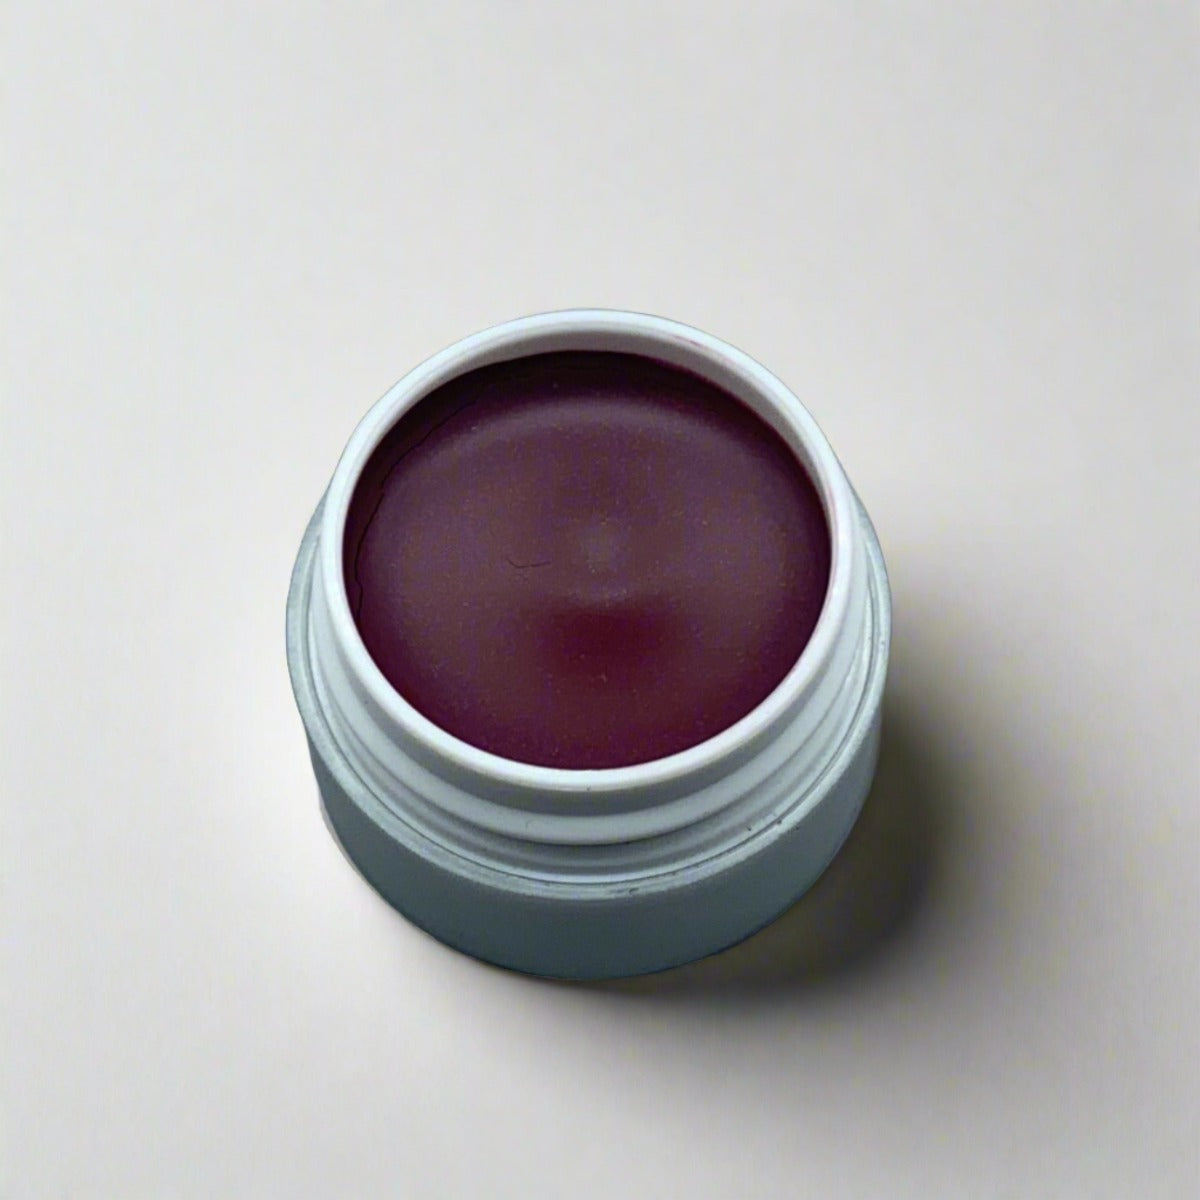 Jar of Balmy Breeze Lip Crème: Luxurious black raspberry lip crème, delivering rich hydration and vibrant color for beautifully moisturized lips